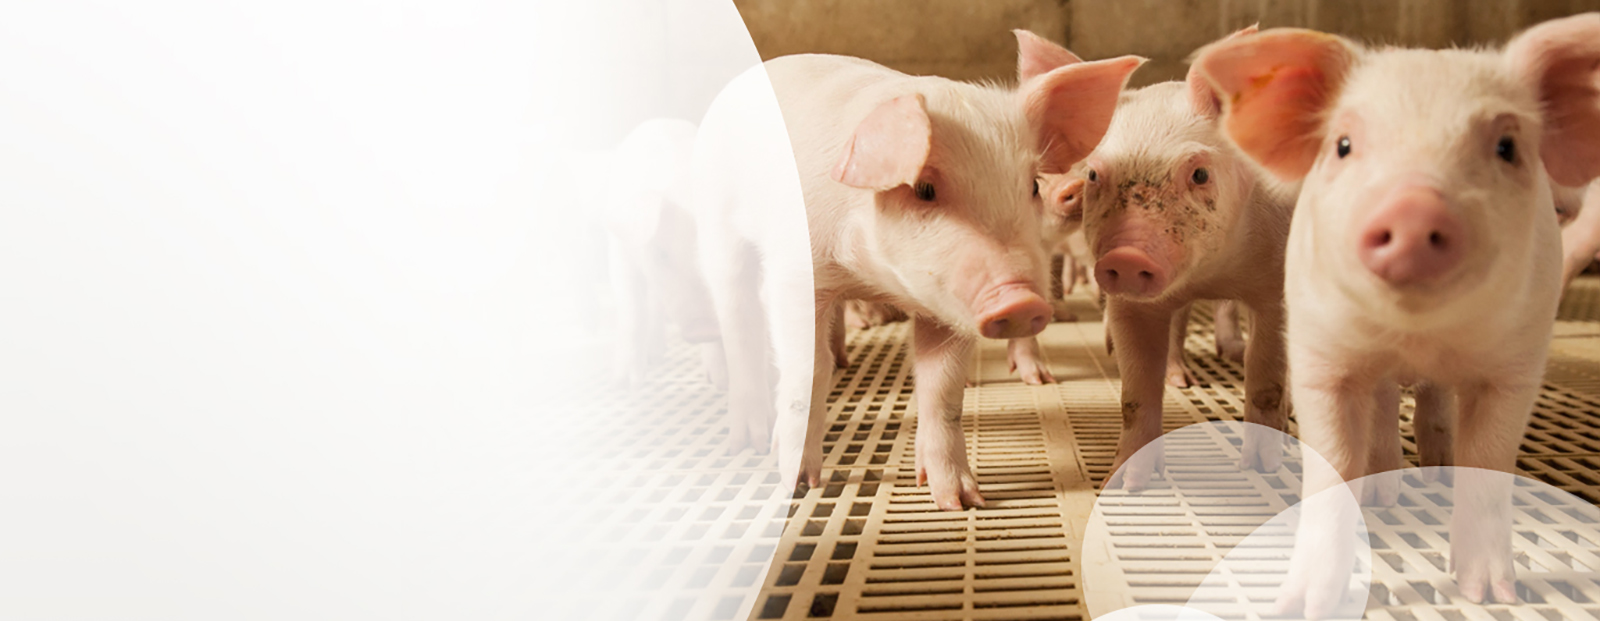 Our broad portfolio of vaccines and pharmaceutical medicines help maintain and improve animal health